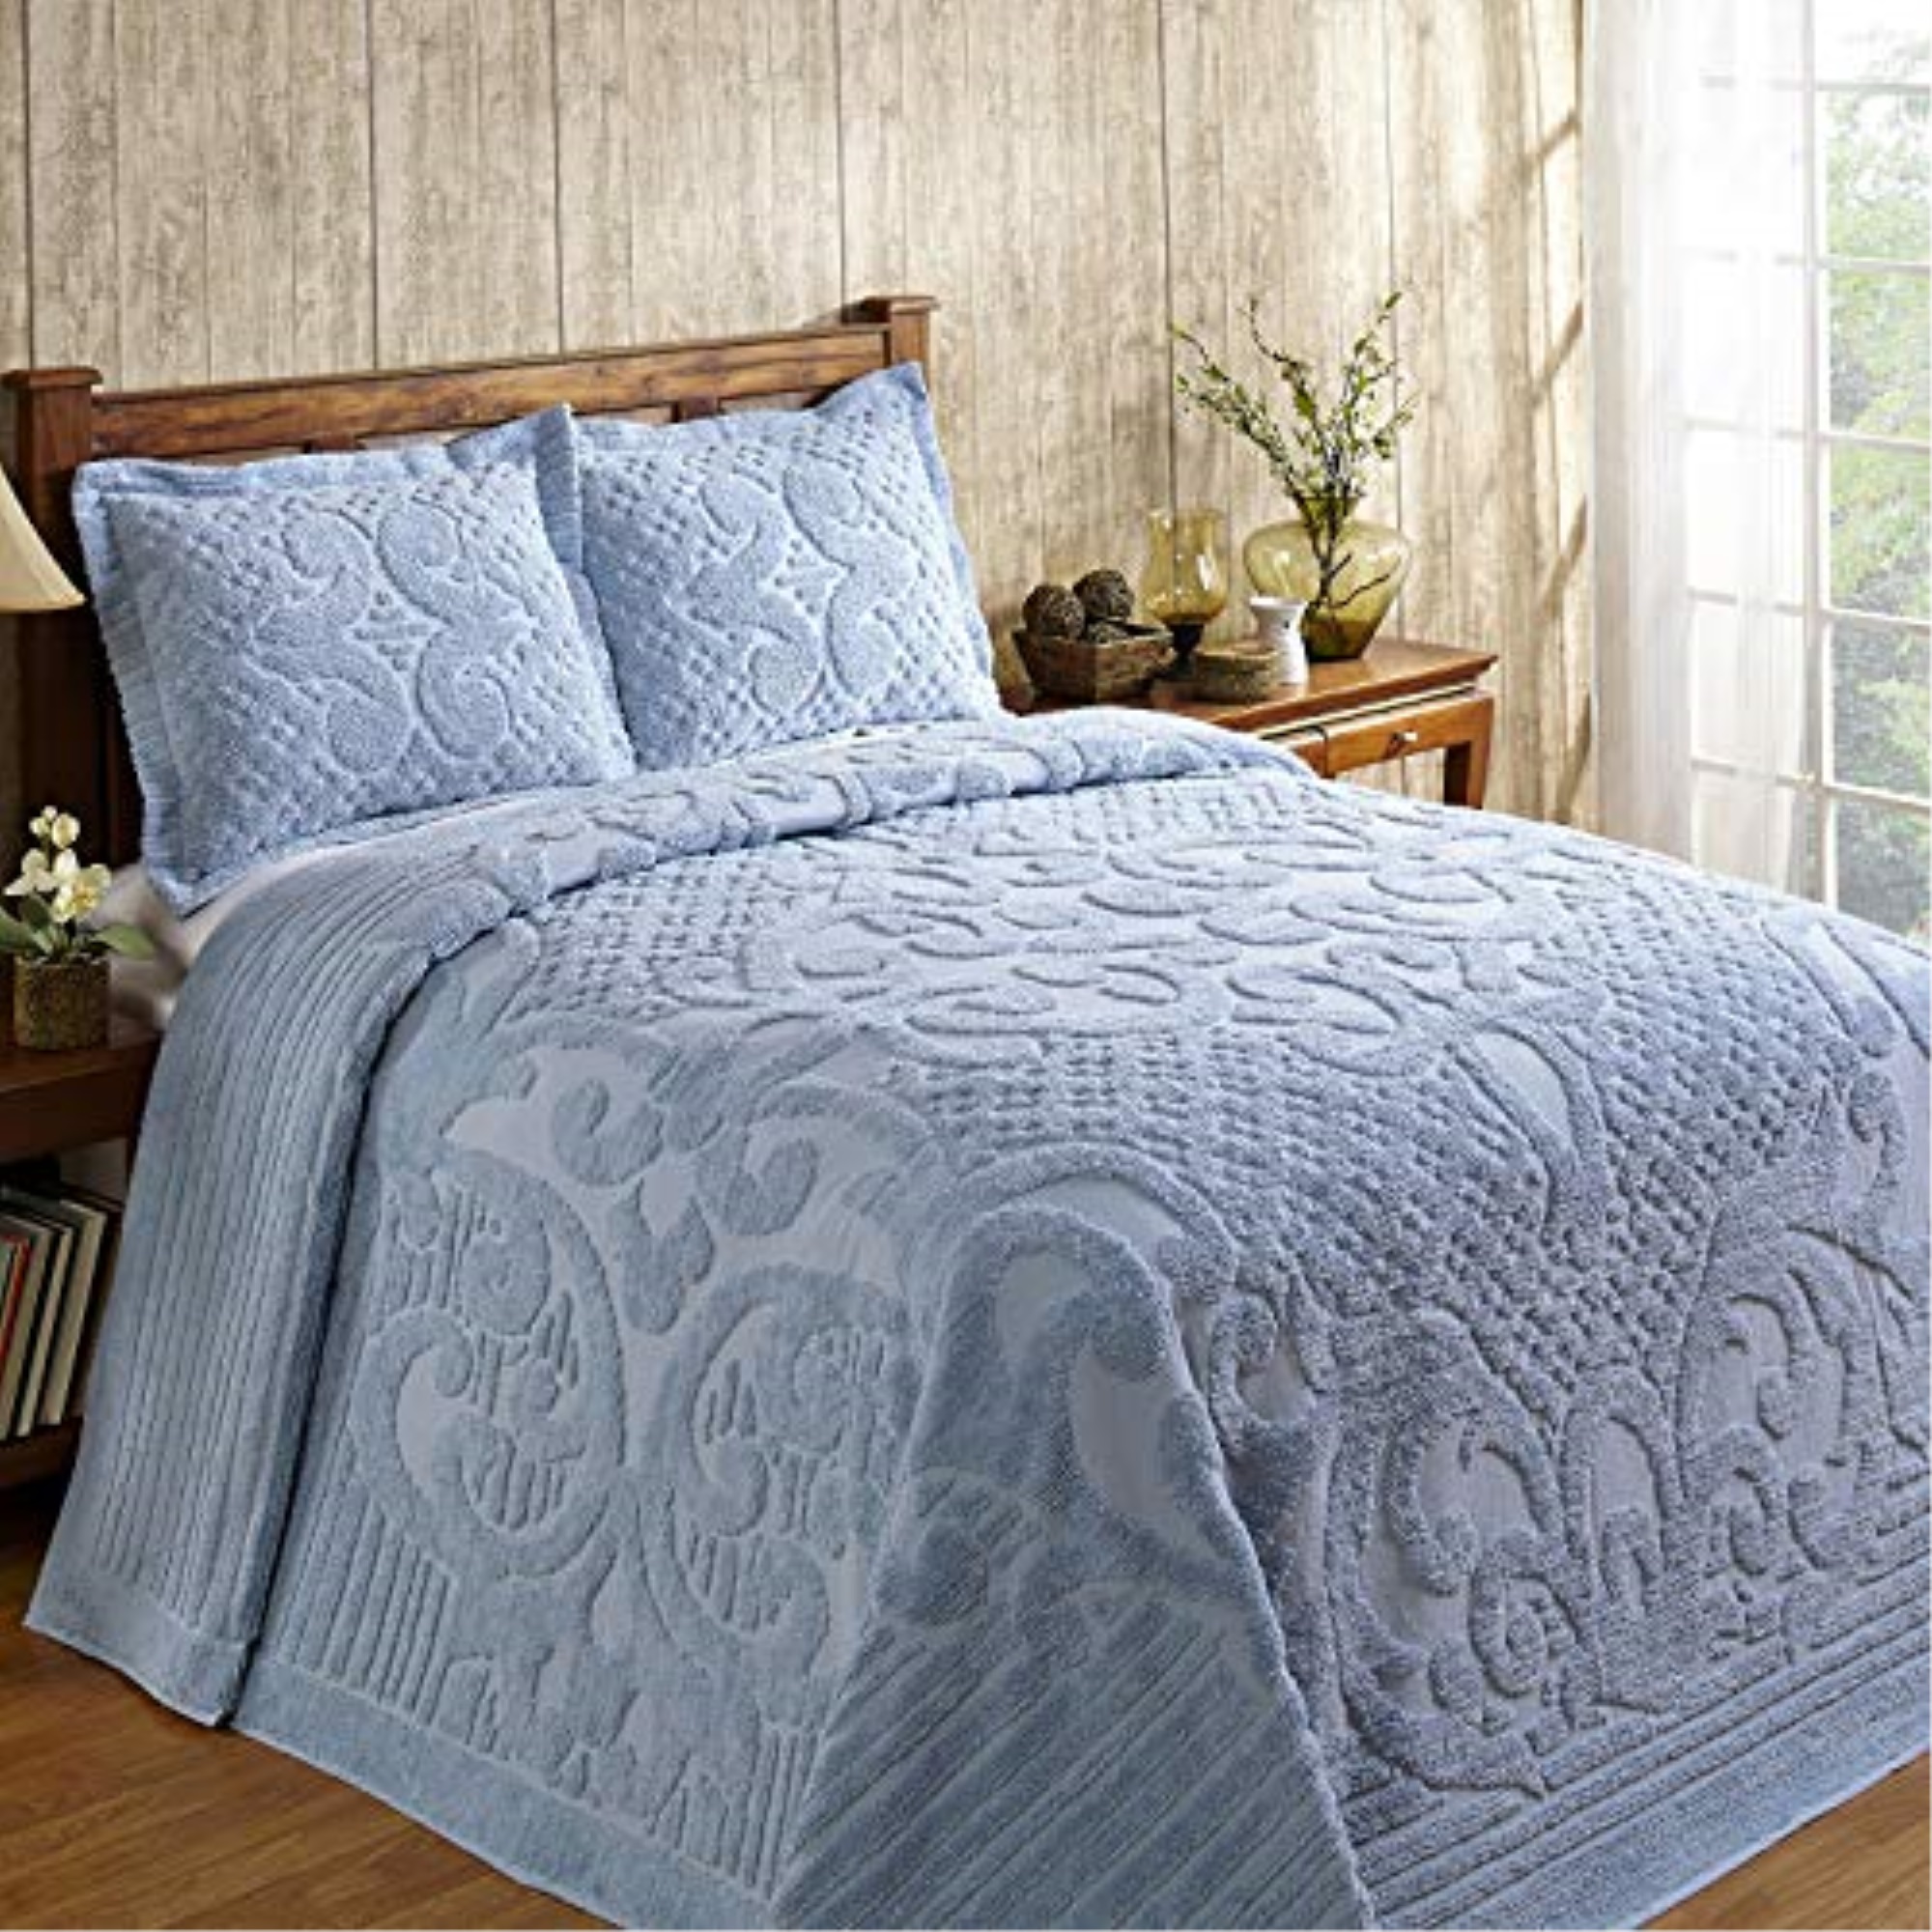 Better Trends Ashton Collection King Bedspread in Blue